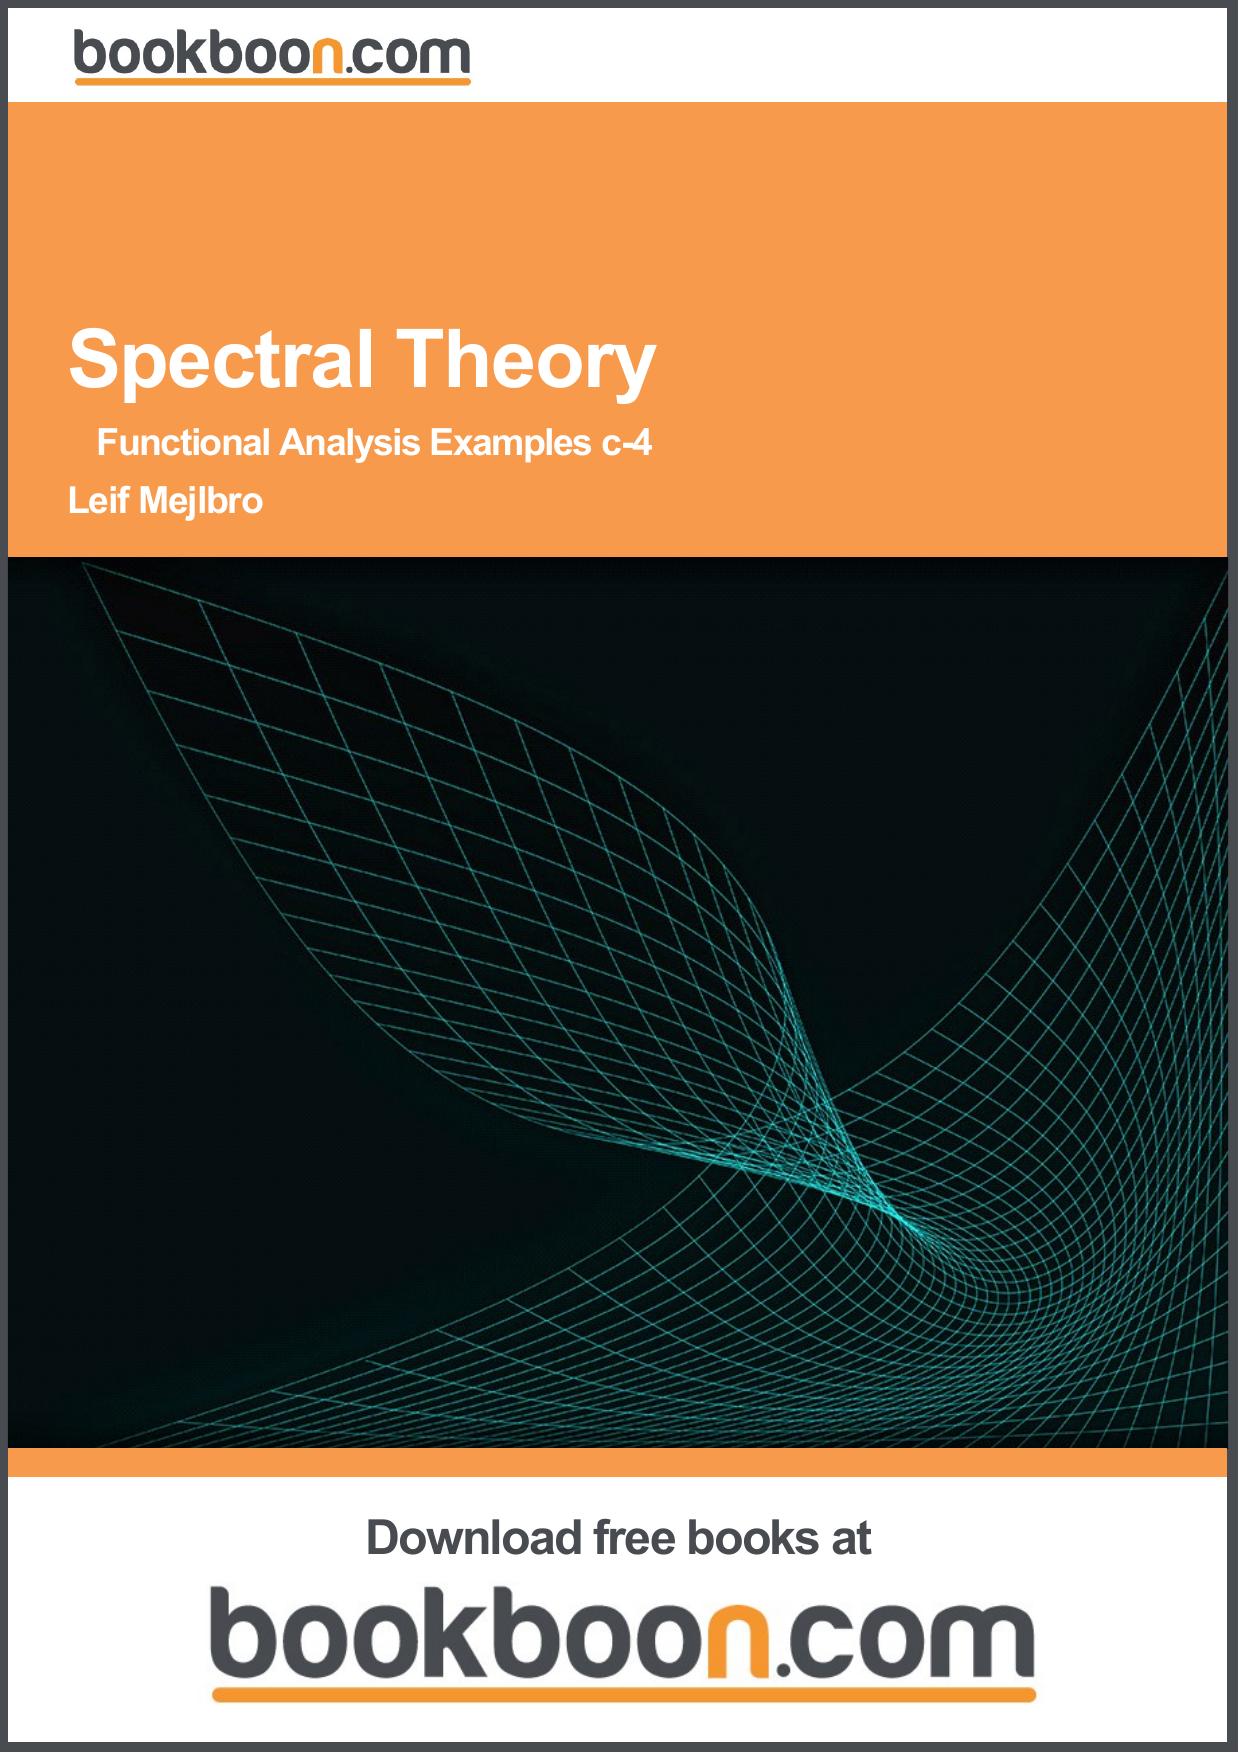 Spectral Theory - Functional Analysis Examples c-4